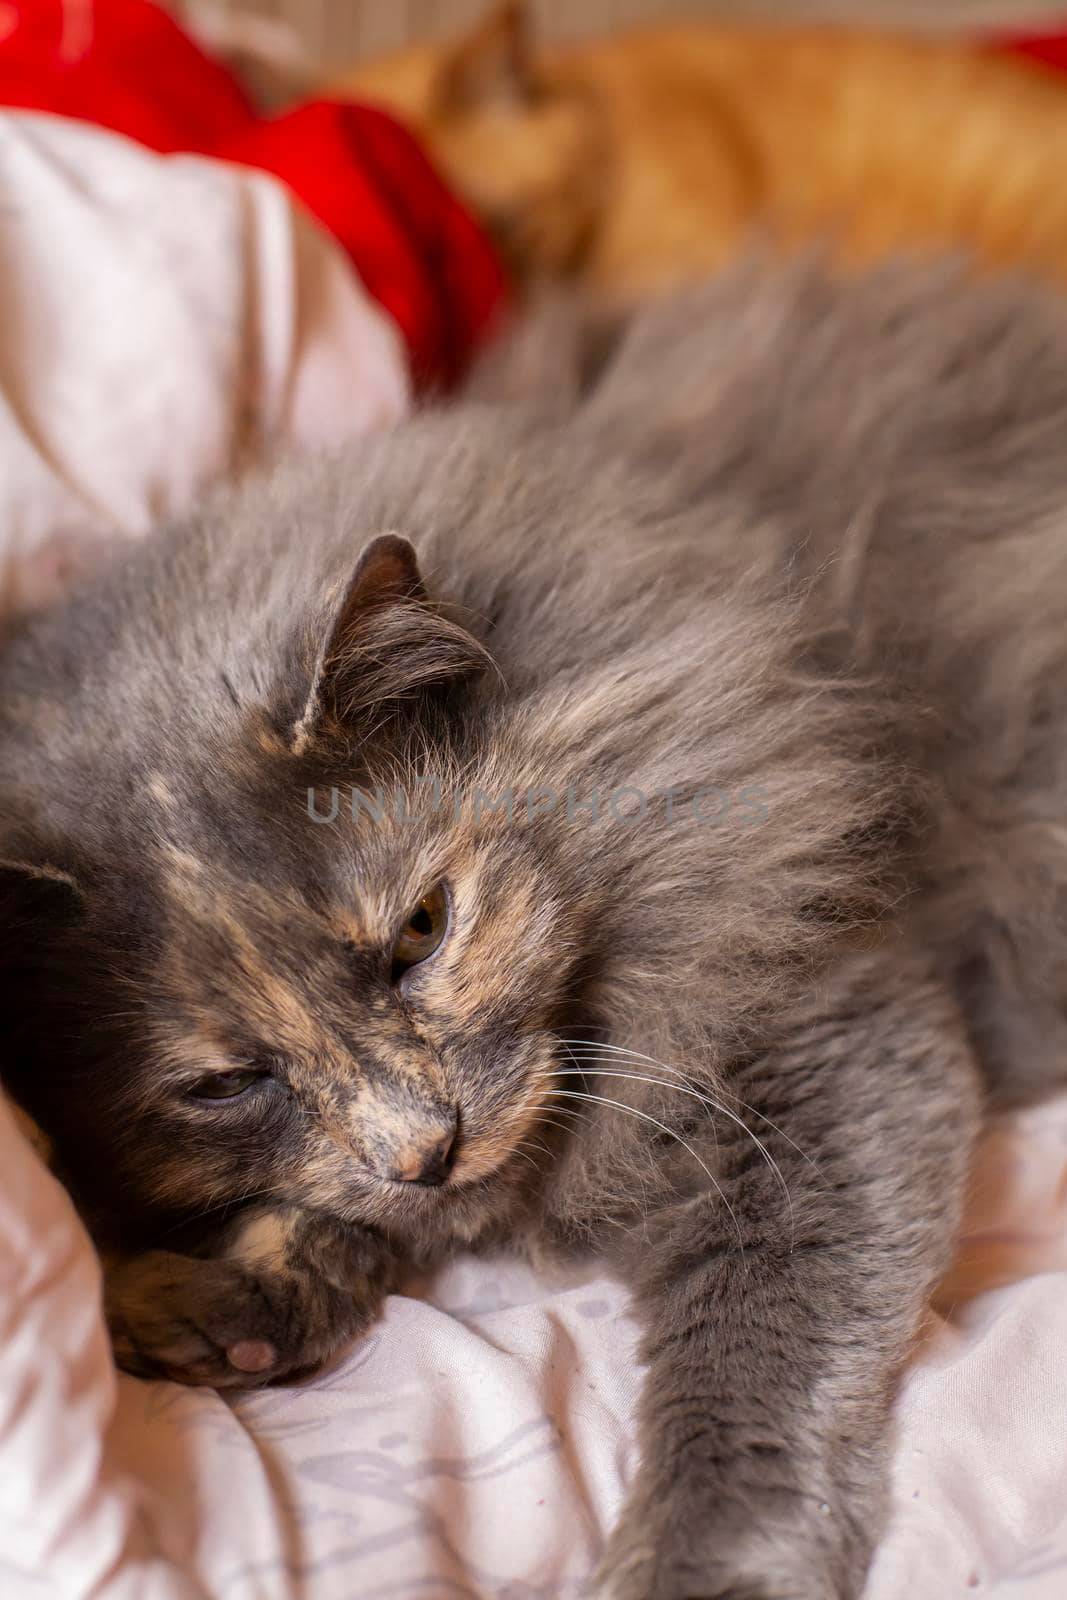 Calm, longhair grey cat resting lazily on a bed with a golden cat in the background